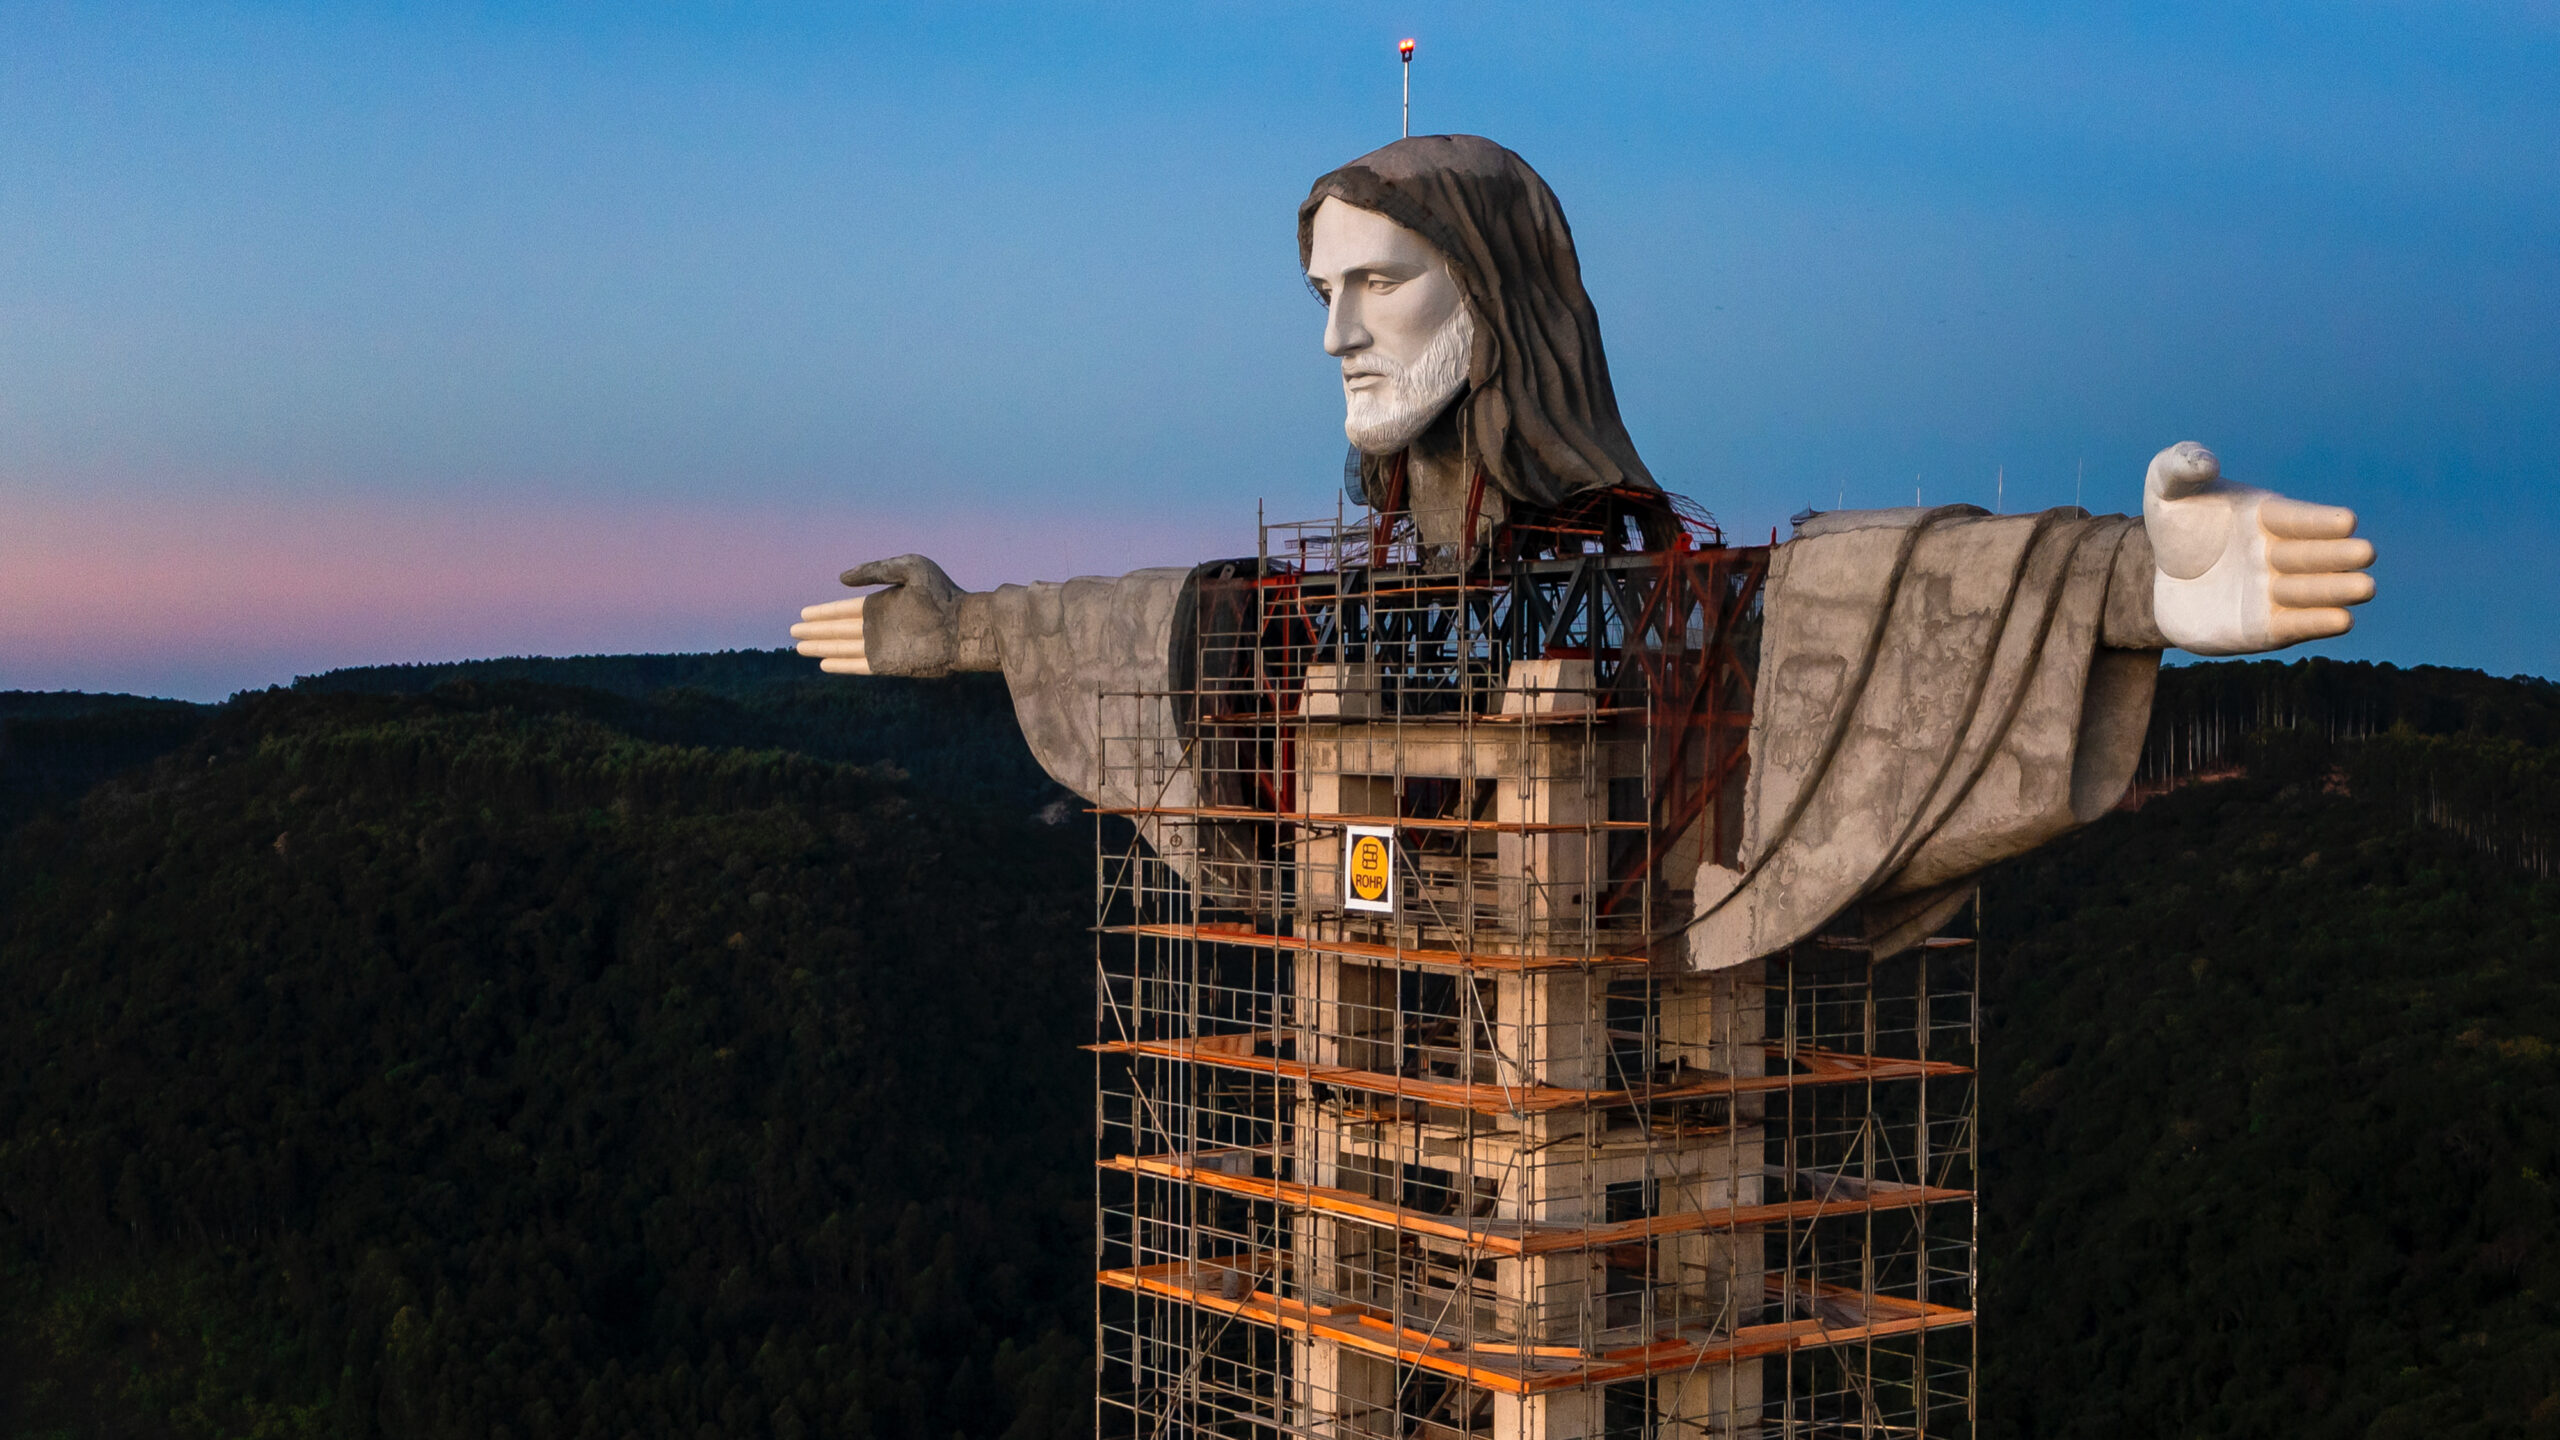 A statue of Jesus climbed up a hill in Brazil just to T-pose :  r/PewdiepieSubmissions